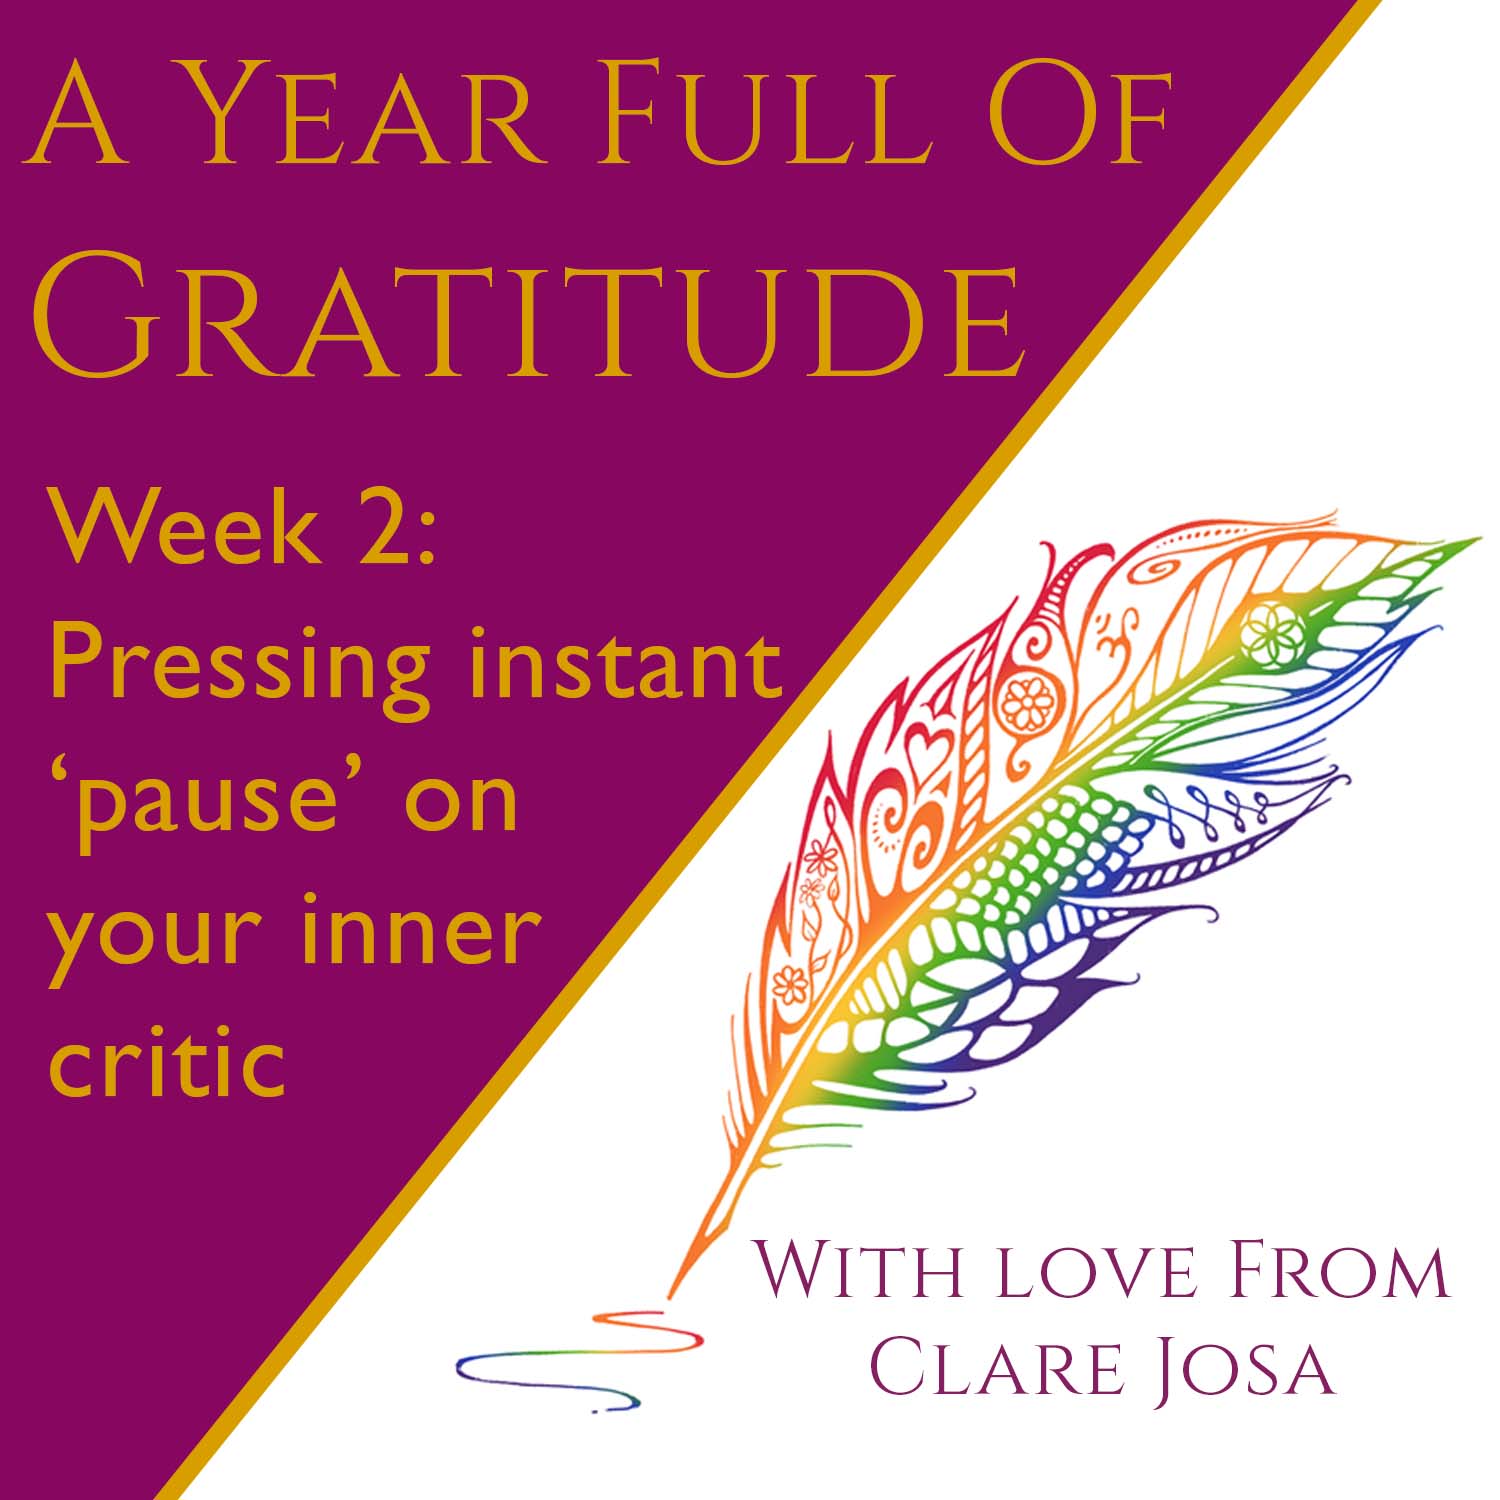 How to press 'pause' on your inner critic - A Year Full Of Gratitude - Week 2